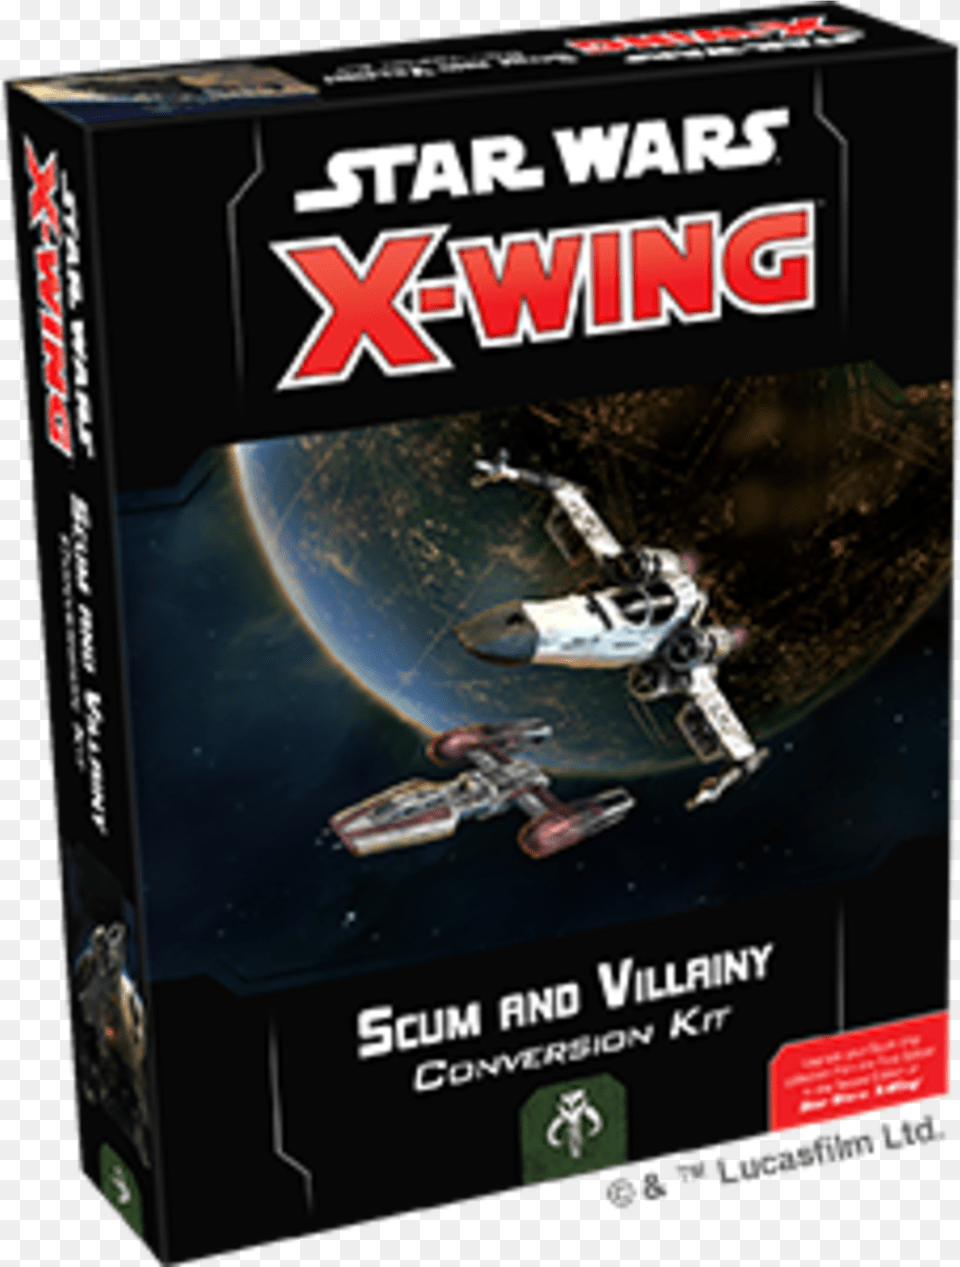 Star Wars X Star Wars X Wing Scum And Villainy Conversion Kit, Astronomy, Outer Space Png Image